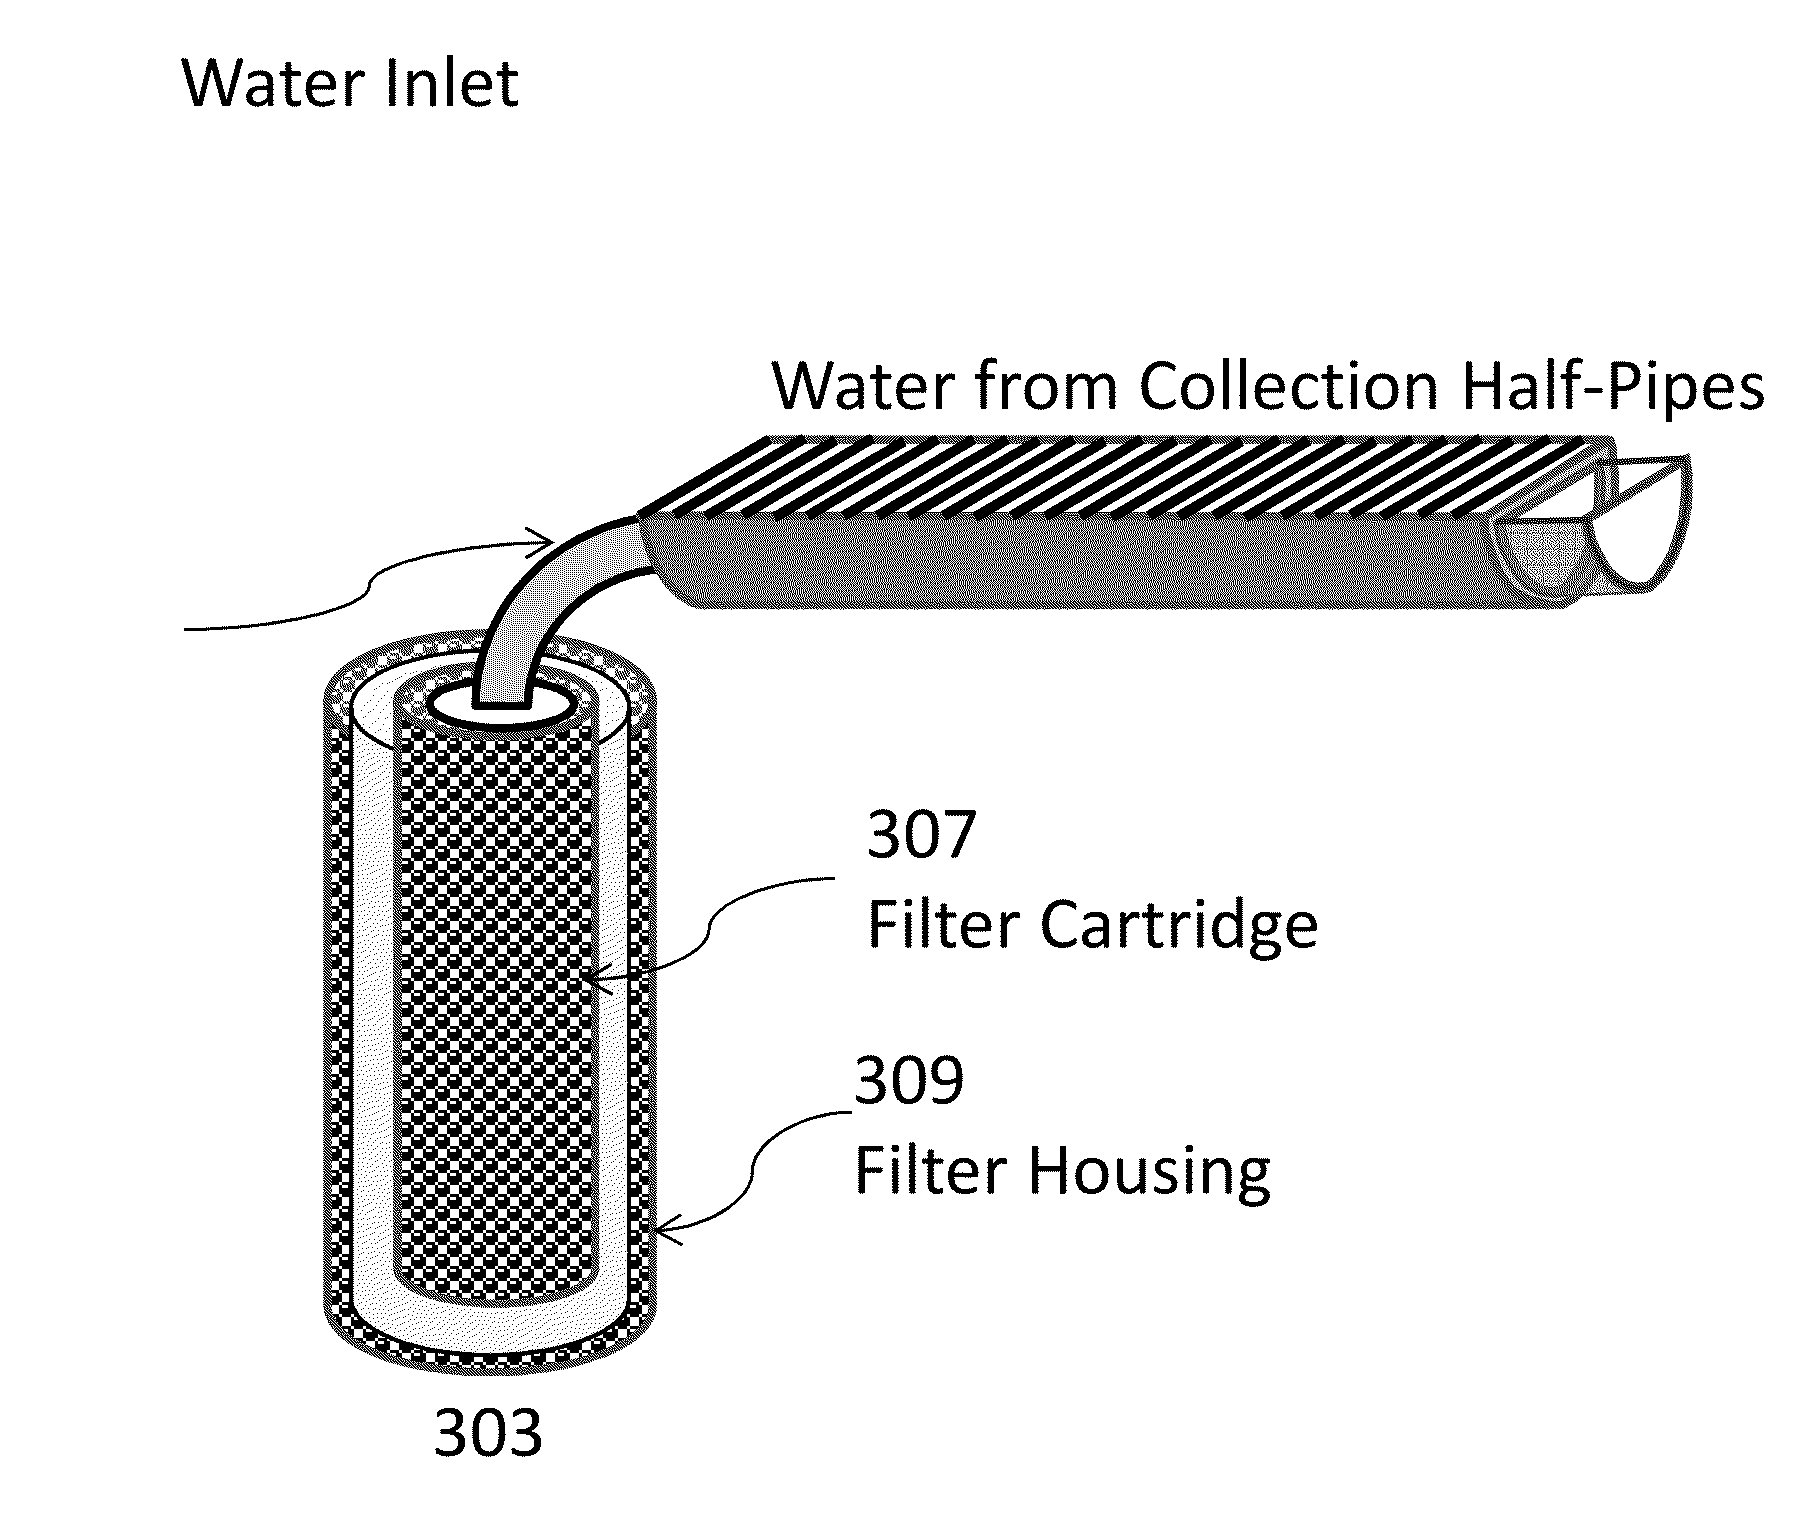 Method and System for Water Reclamation, Purification, and Reuse for Residential, Commercial, and Agricultural Applications